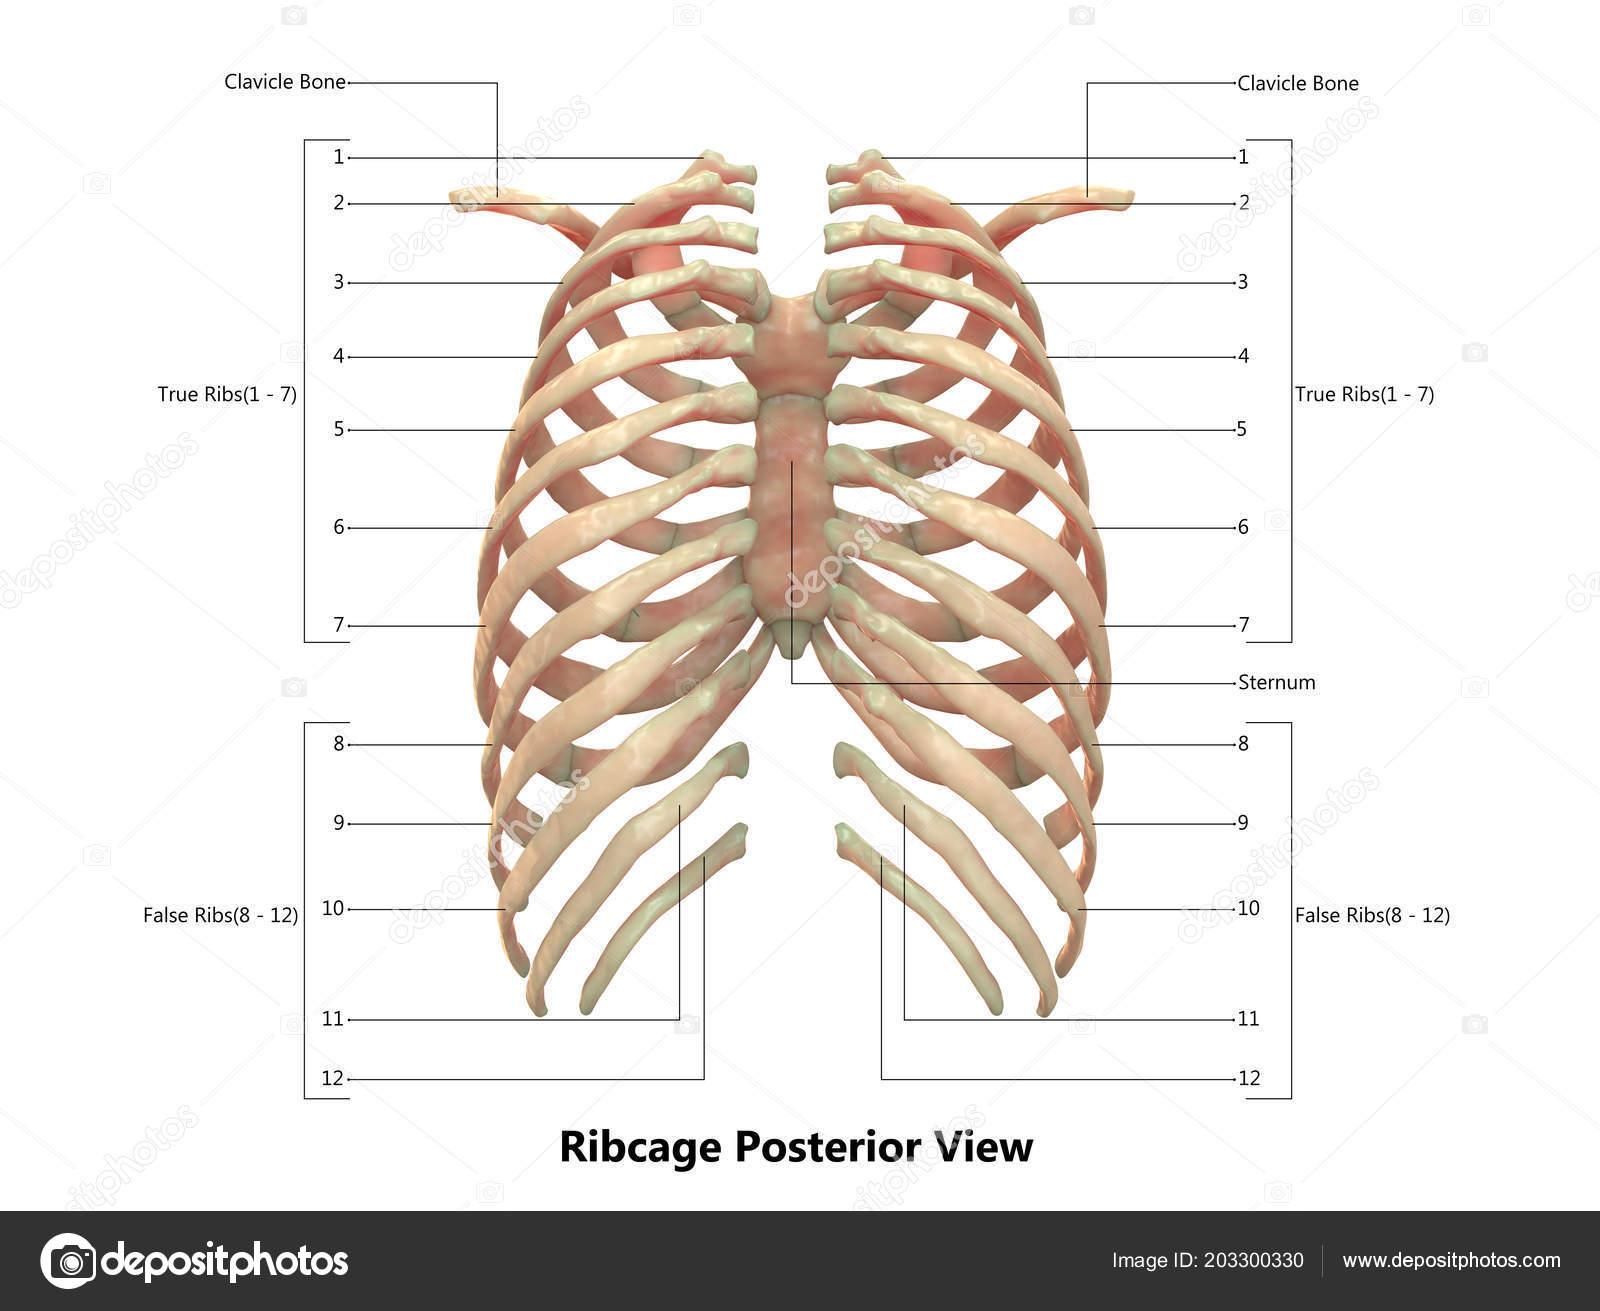 Rib Cage Pictures Images Stock Photos Depositphotos